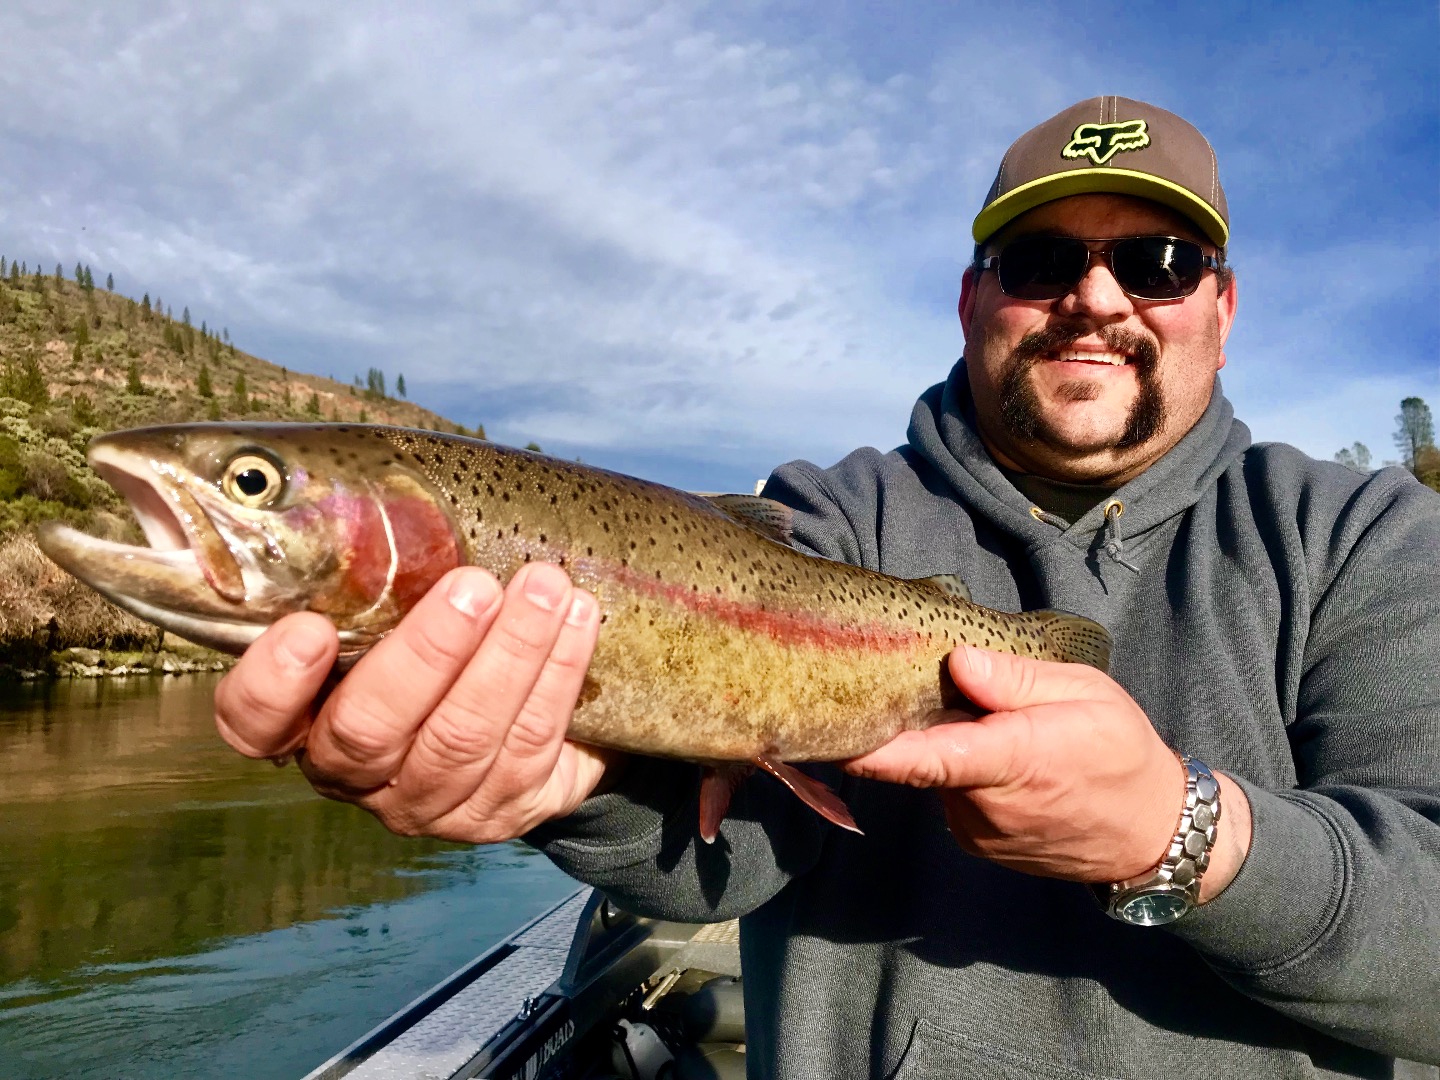 Catch and release rainbows today!